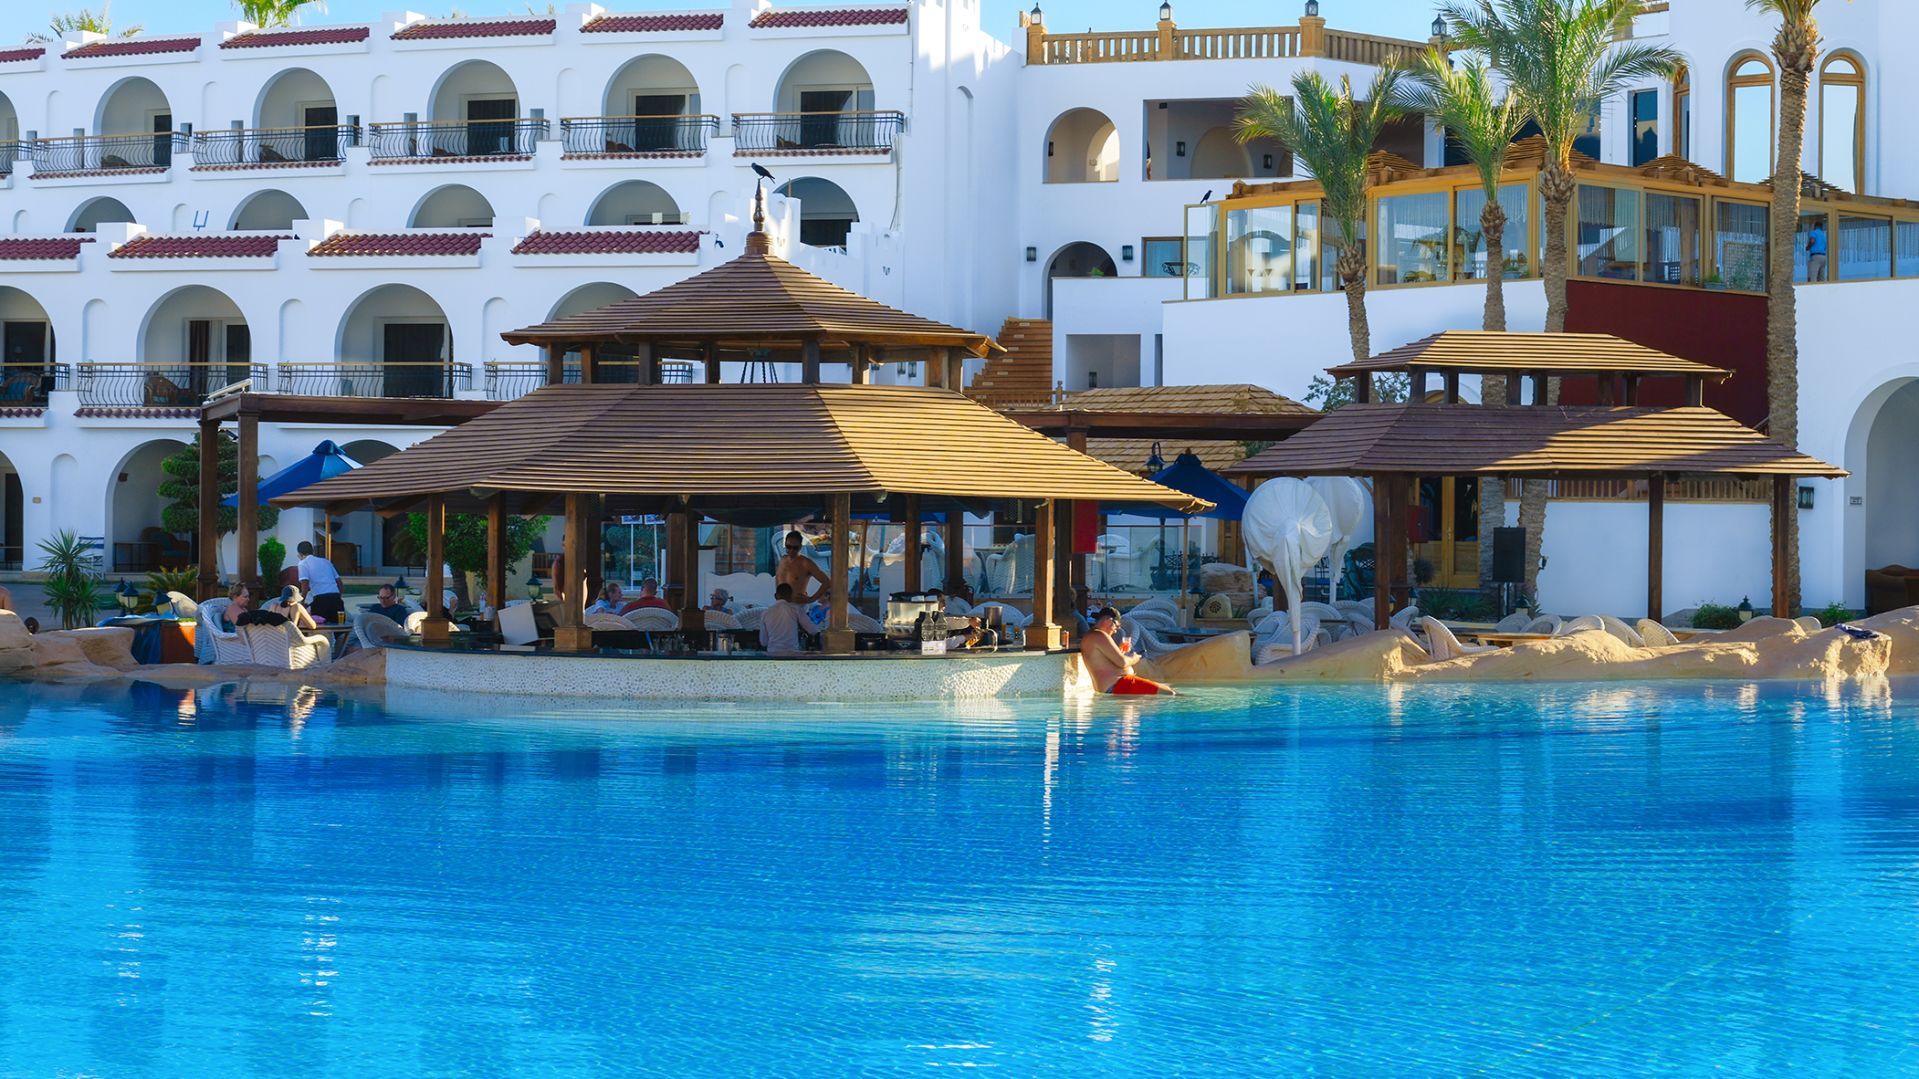 A Resort With A Pool